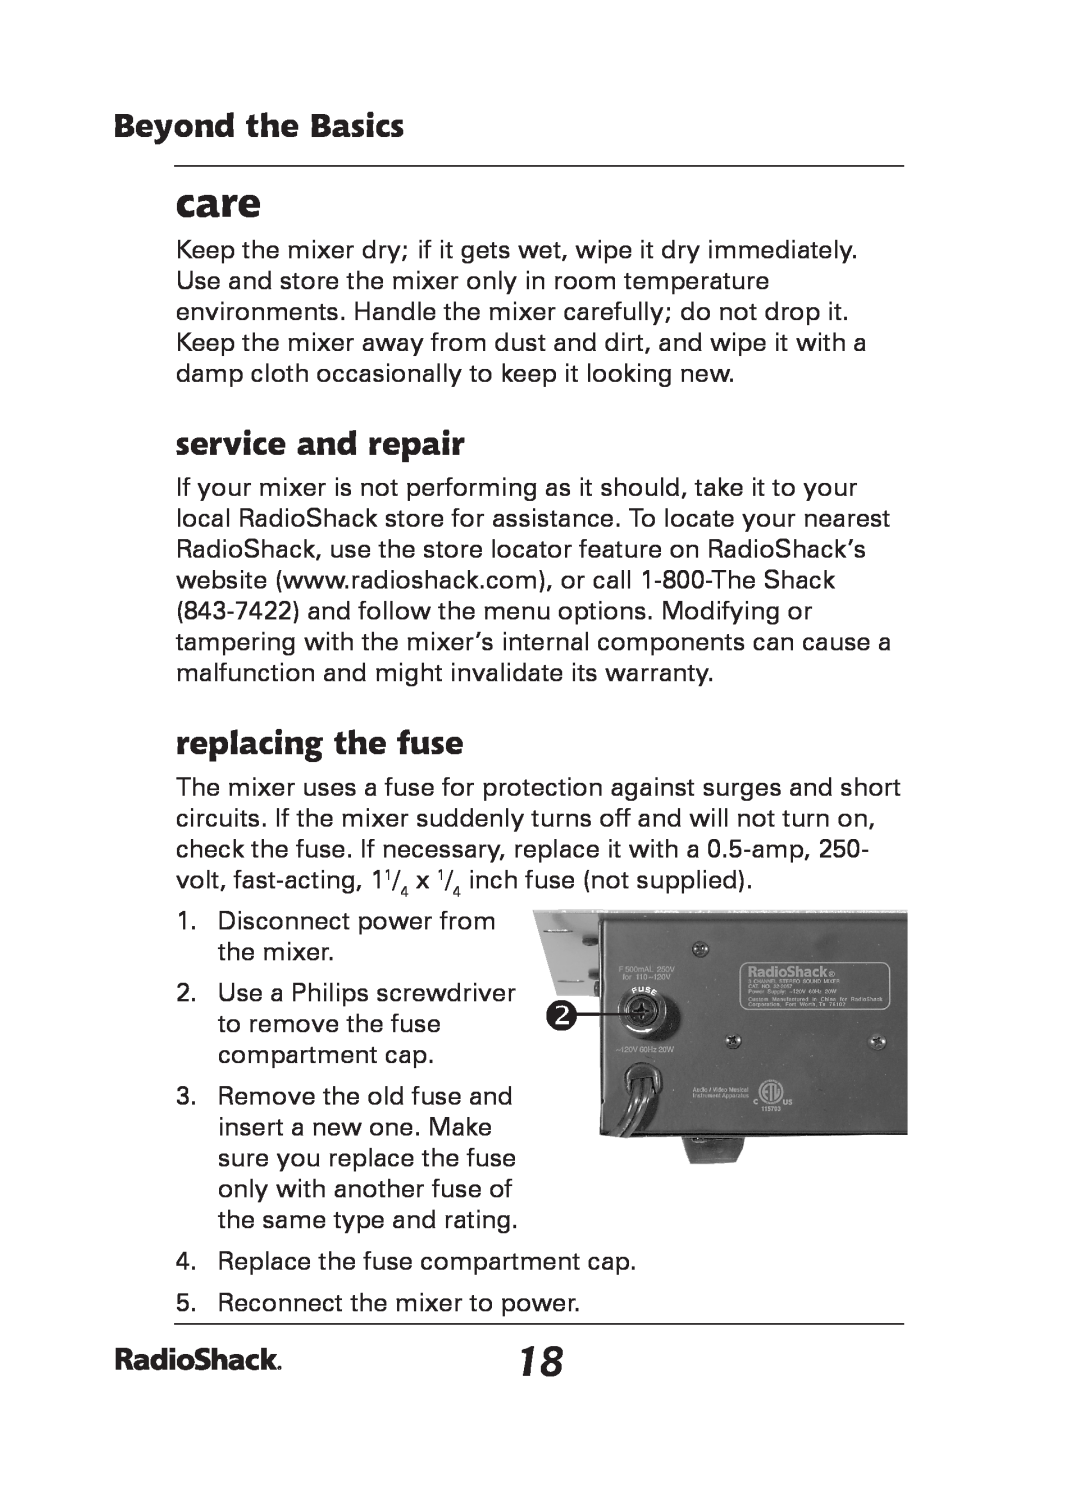 Radio Shack 32-2057 quick start care, service and repair, replacing the fuse, Beyond the Basics 